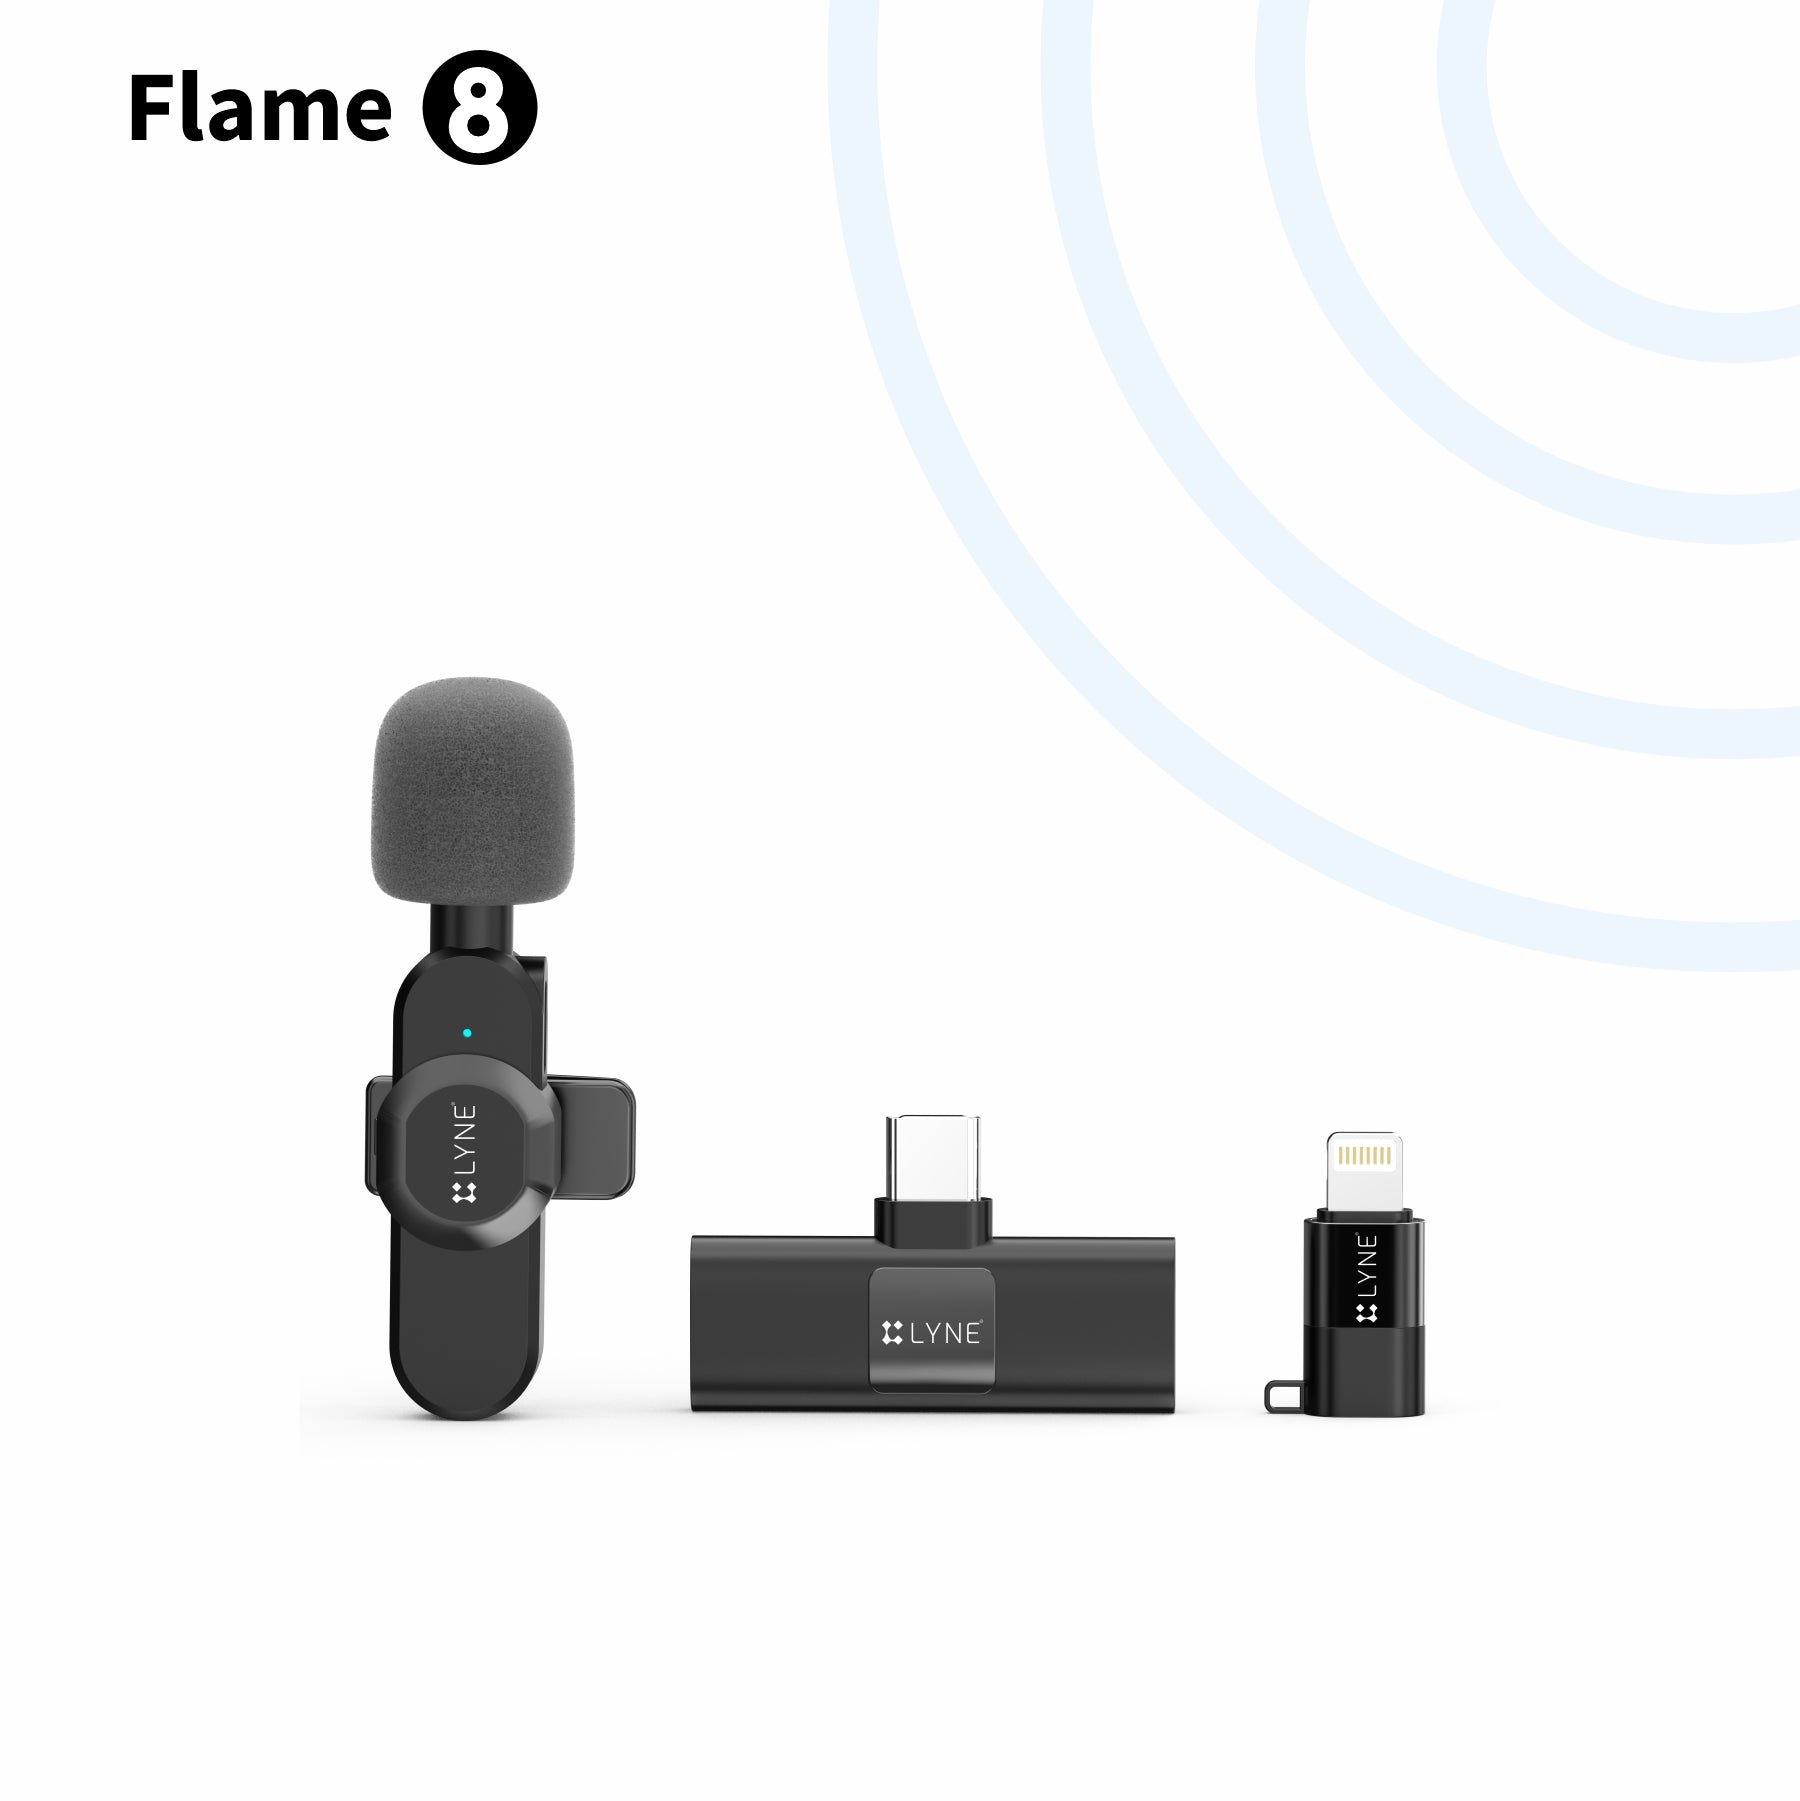  LYNE Flame 8 Other Accessories